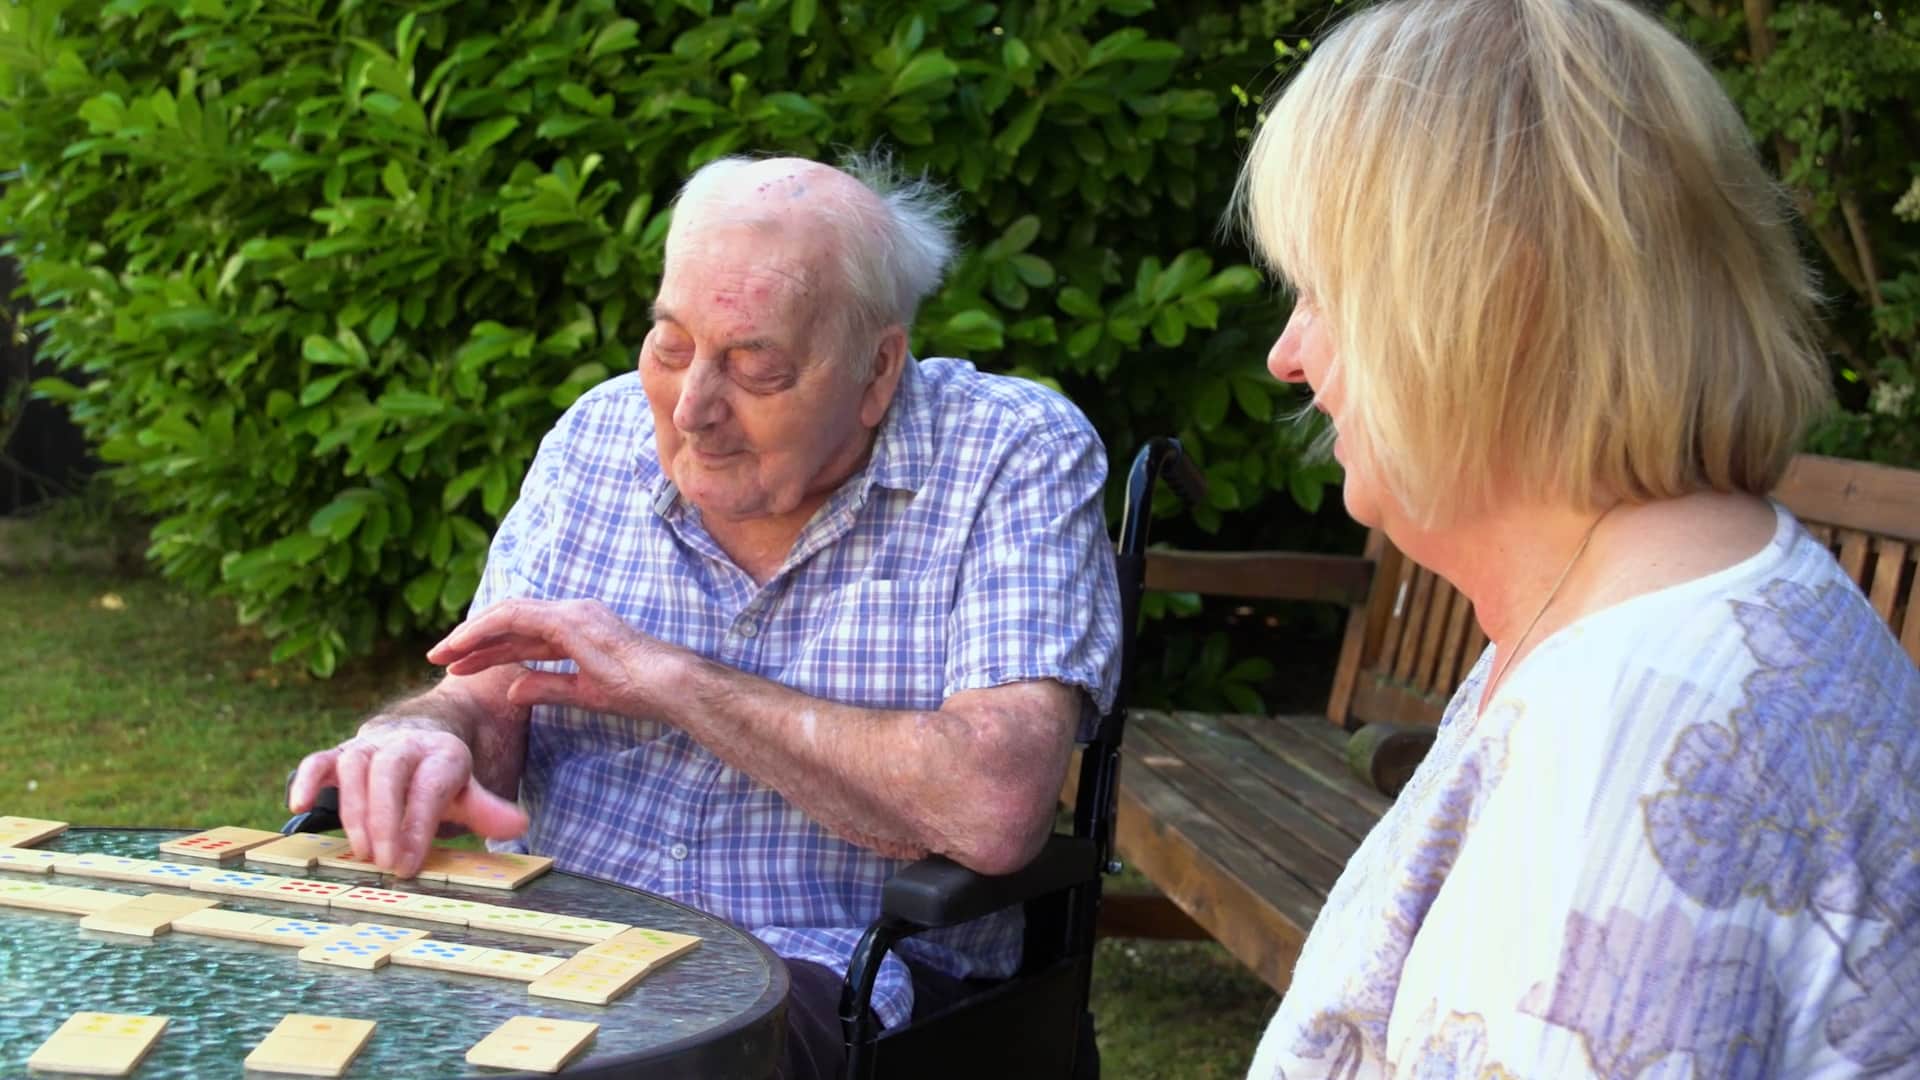 A resident and their relative playing dominoes in the garden at Lily House Care Home in Ely.